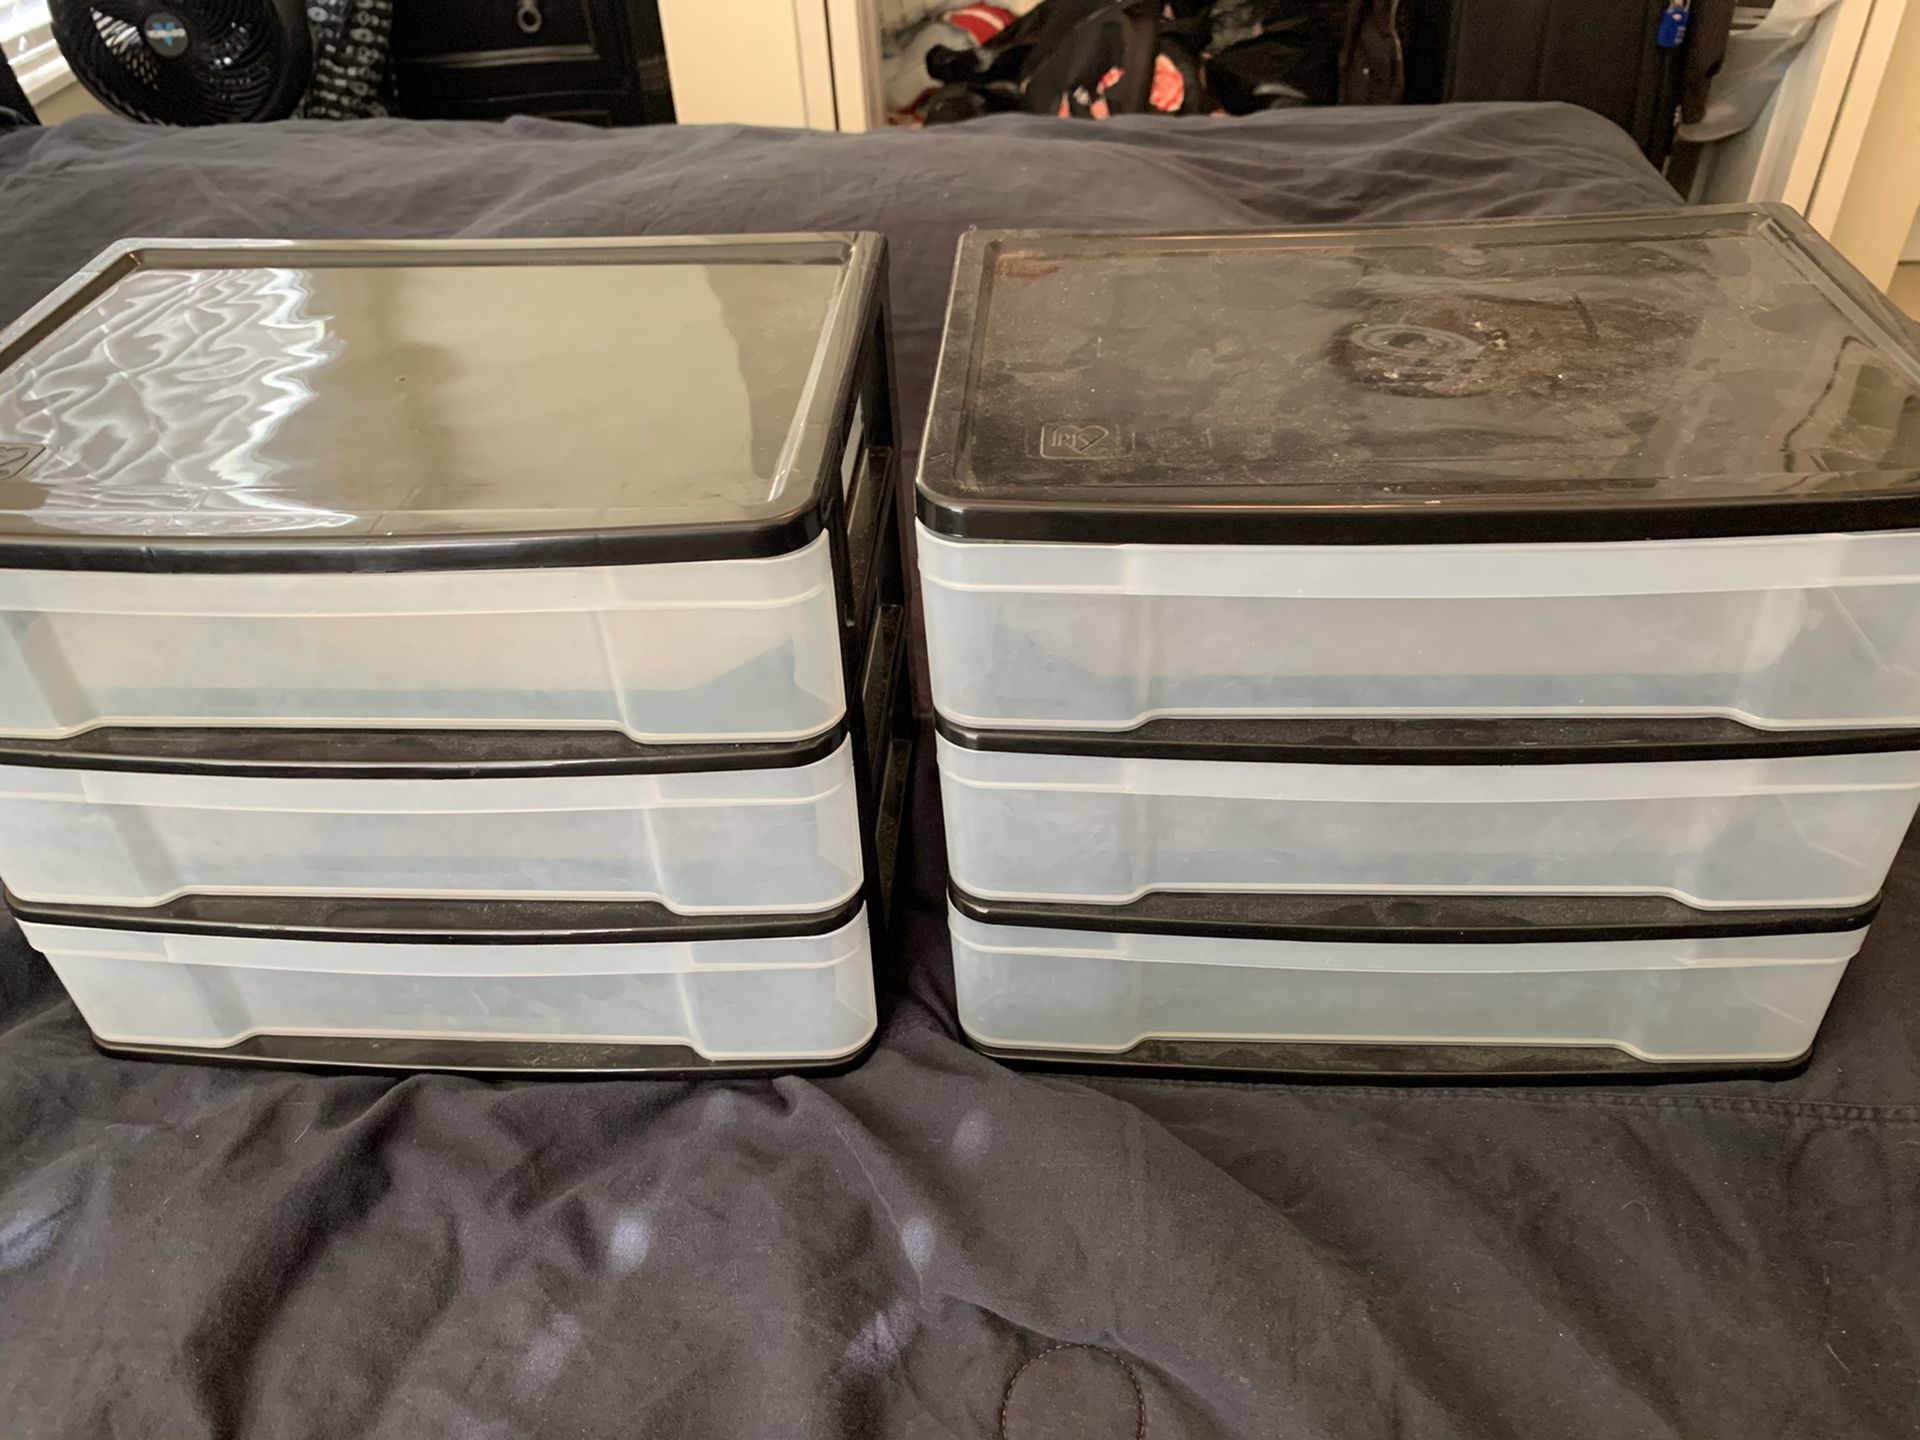 Storage containers / organizers